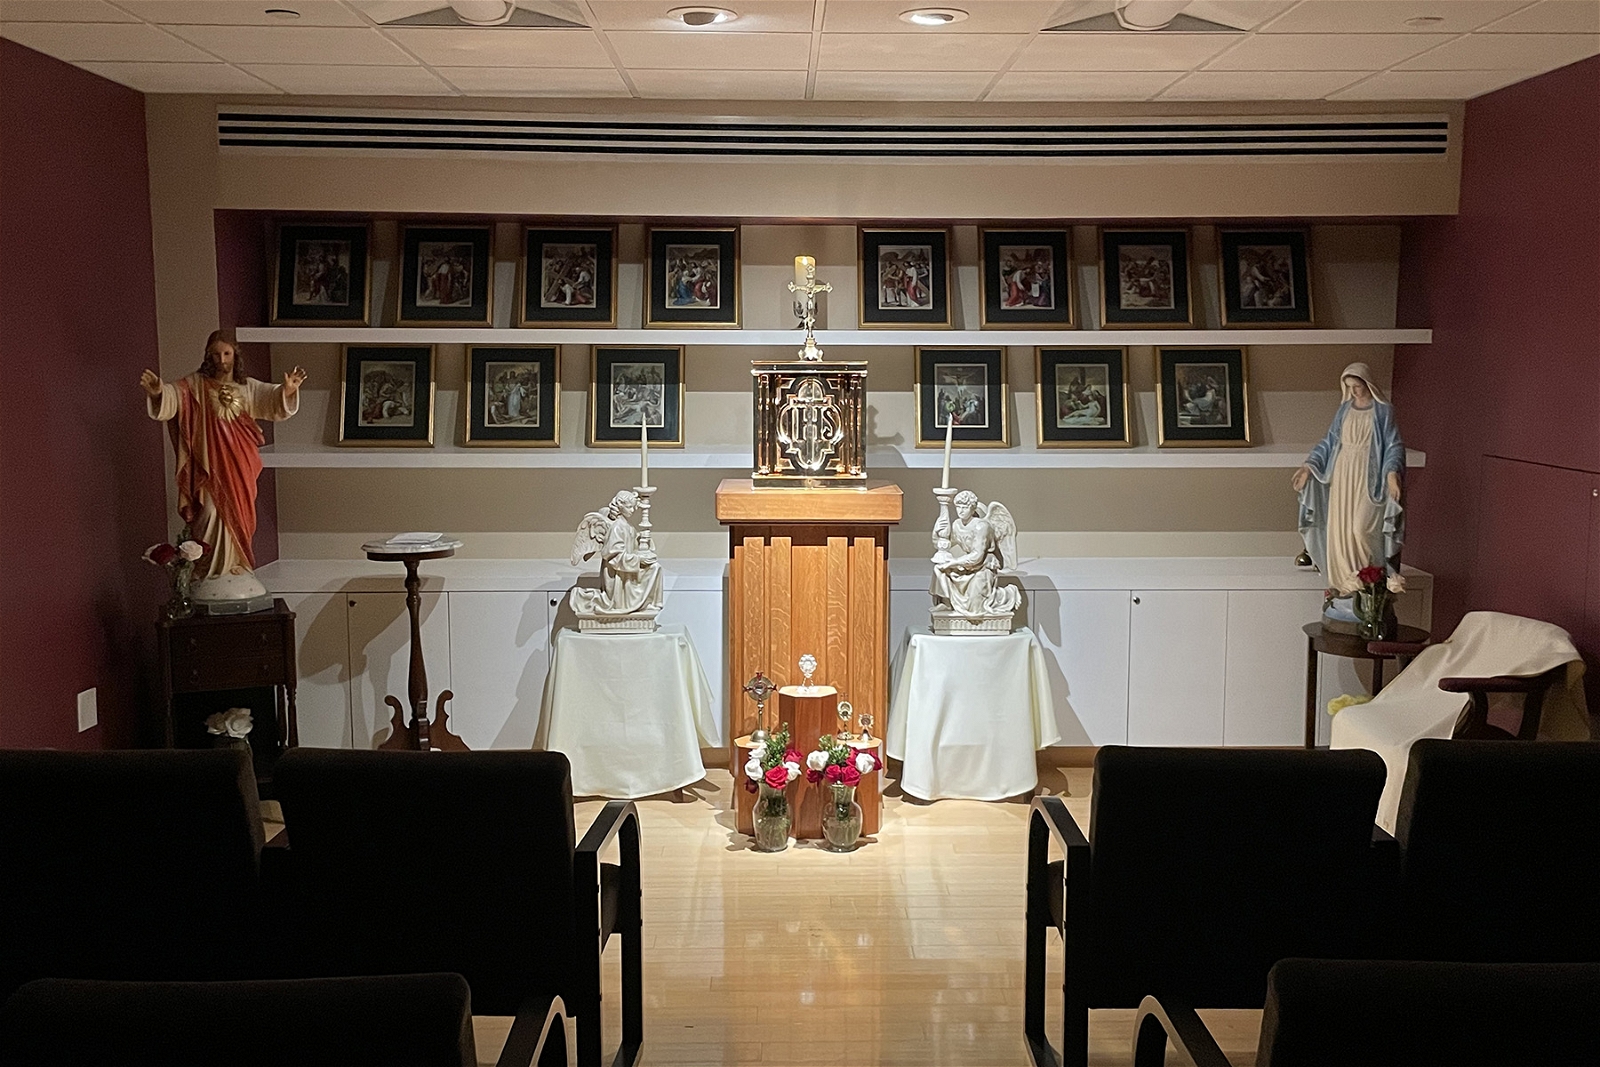 Our Lady of the Sacred Heart Chapel at JPCatholic